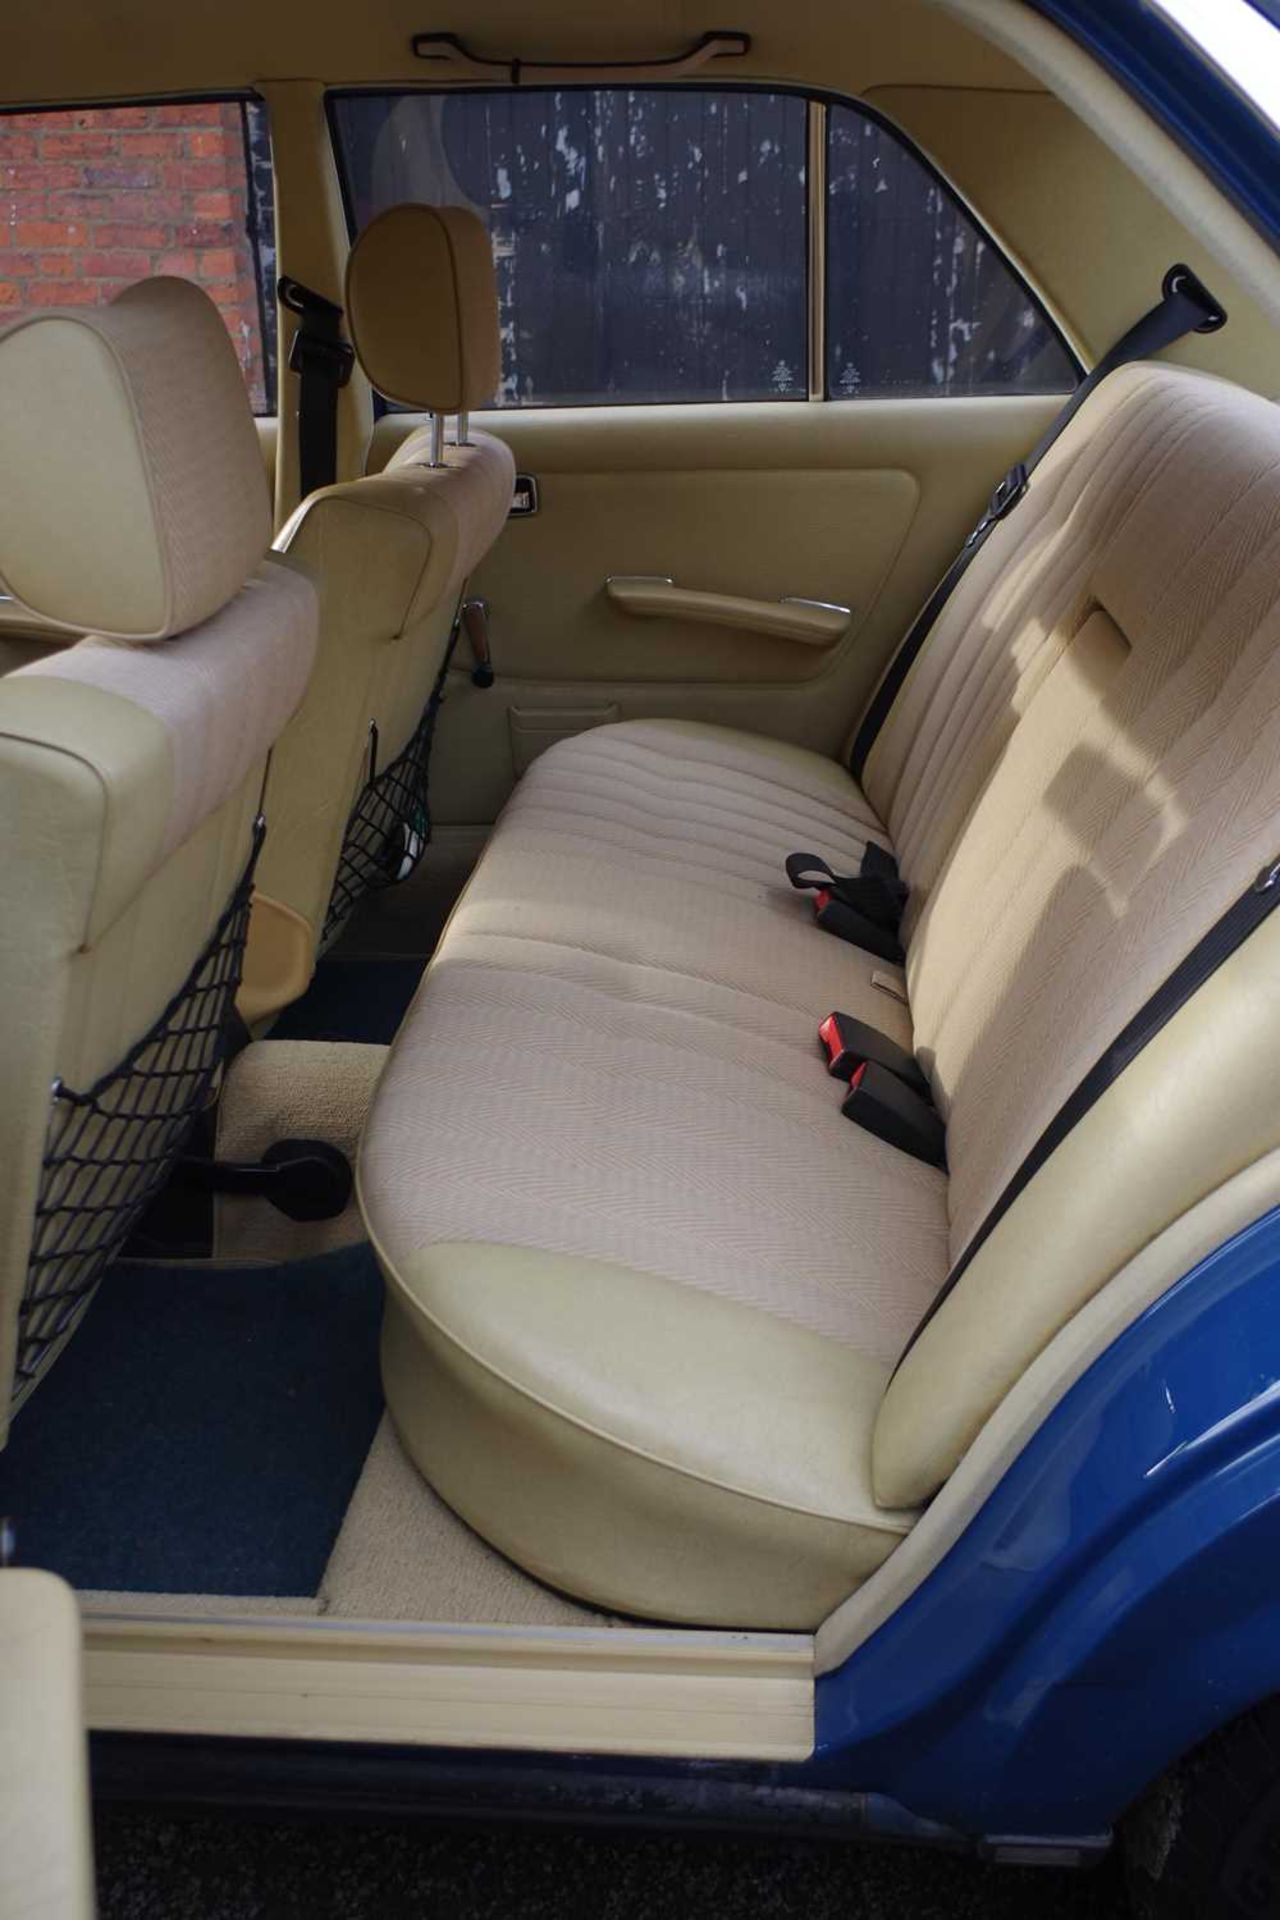 A 1981 MERCEDES 200 IN LABRADOR BLUE - Image 10 of 18